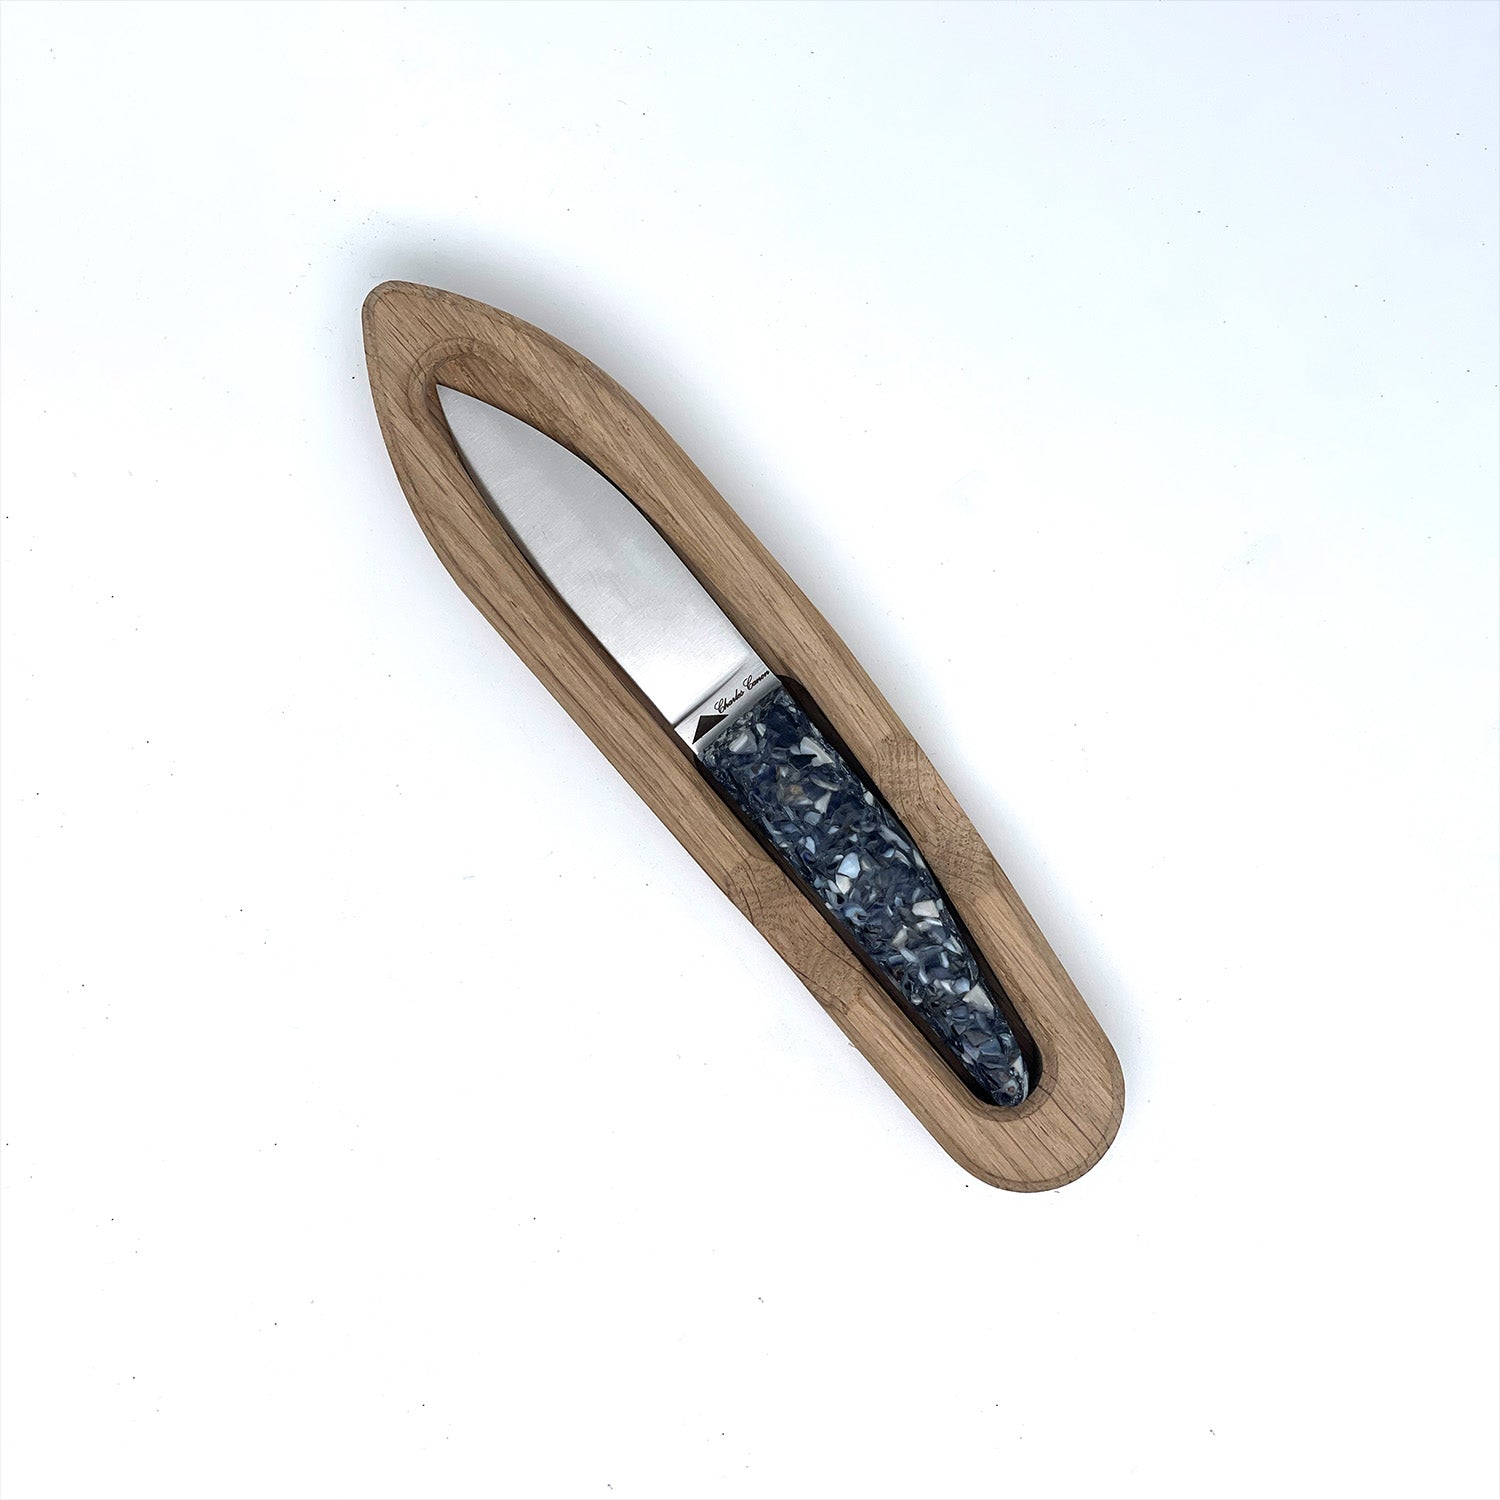 Small oyster knife with a handle made from recycled mussel shells